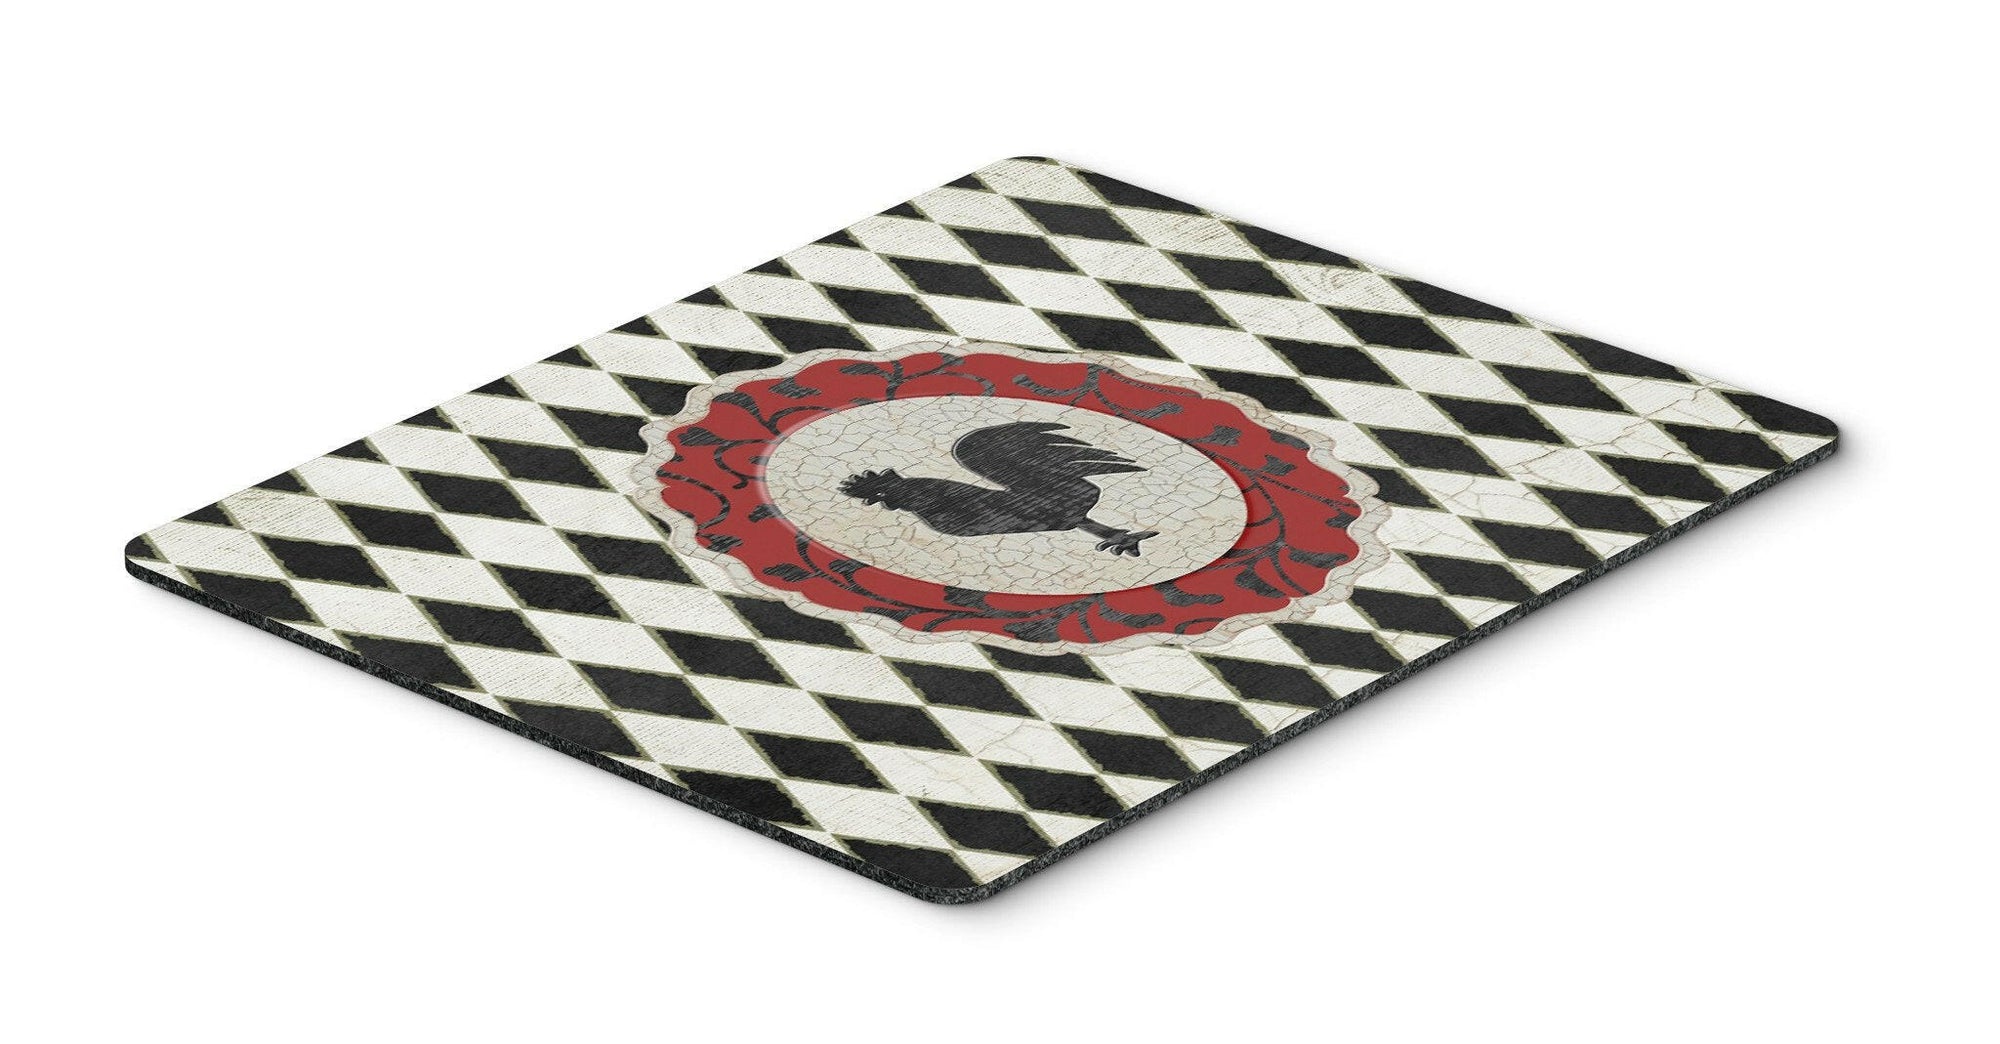 Rooster Harlequin Black and white Mouse Pad, Hot Pad or Trivet SB3086MP by Caroline's Treasures